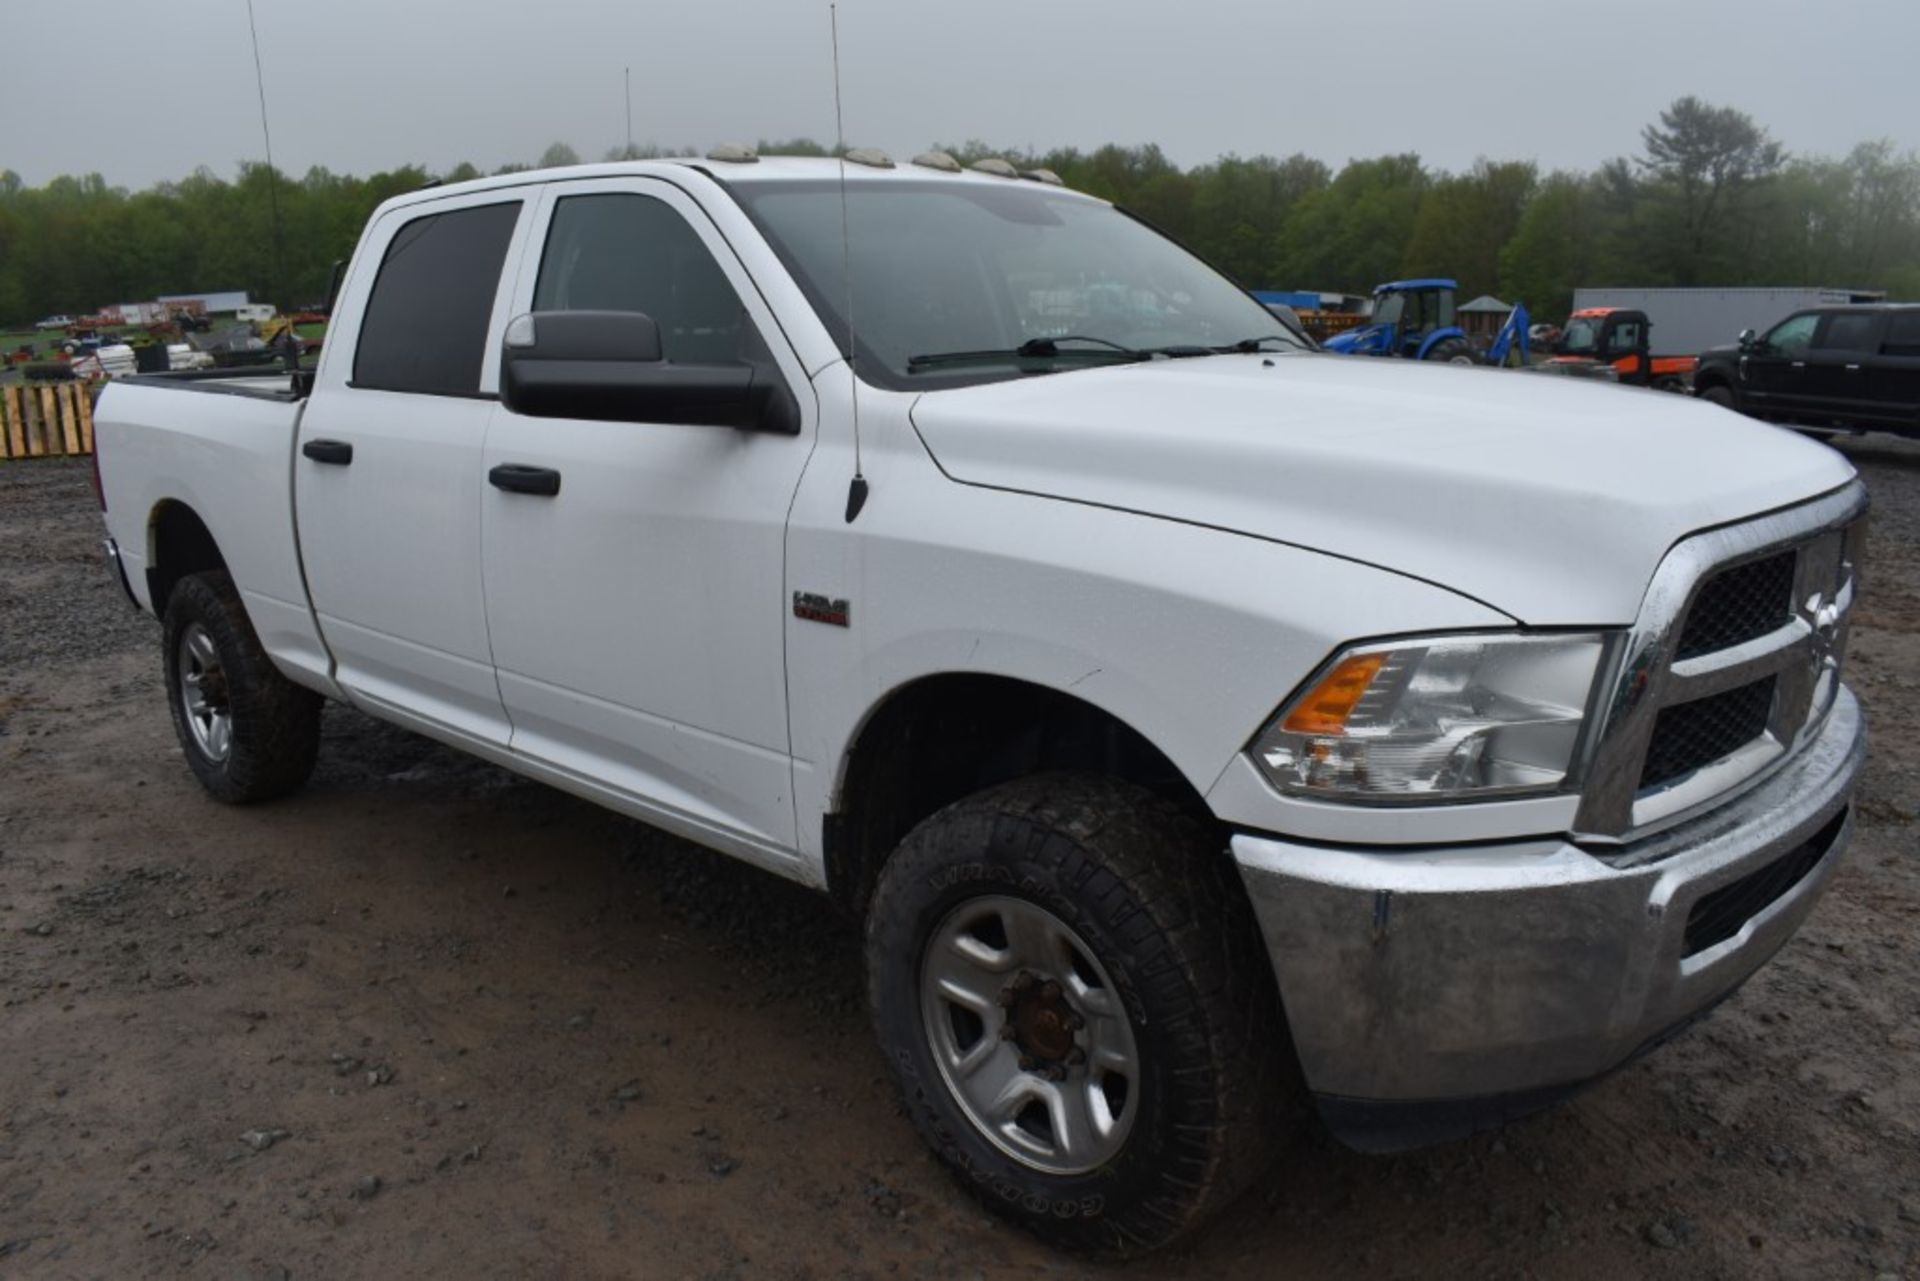 2014 Dodge Ram 2500 Truck With Title, 194341 Miles, Runs and Drives, Hemi 5.7 Gas Engine, Automatic, - Image 3 of 27